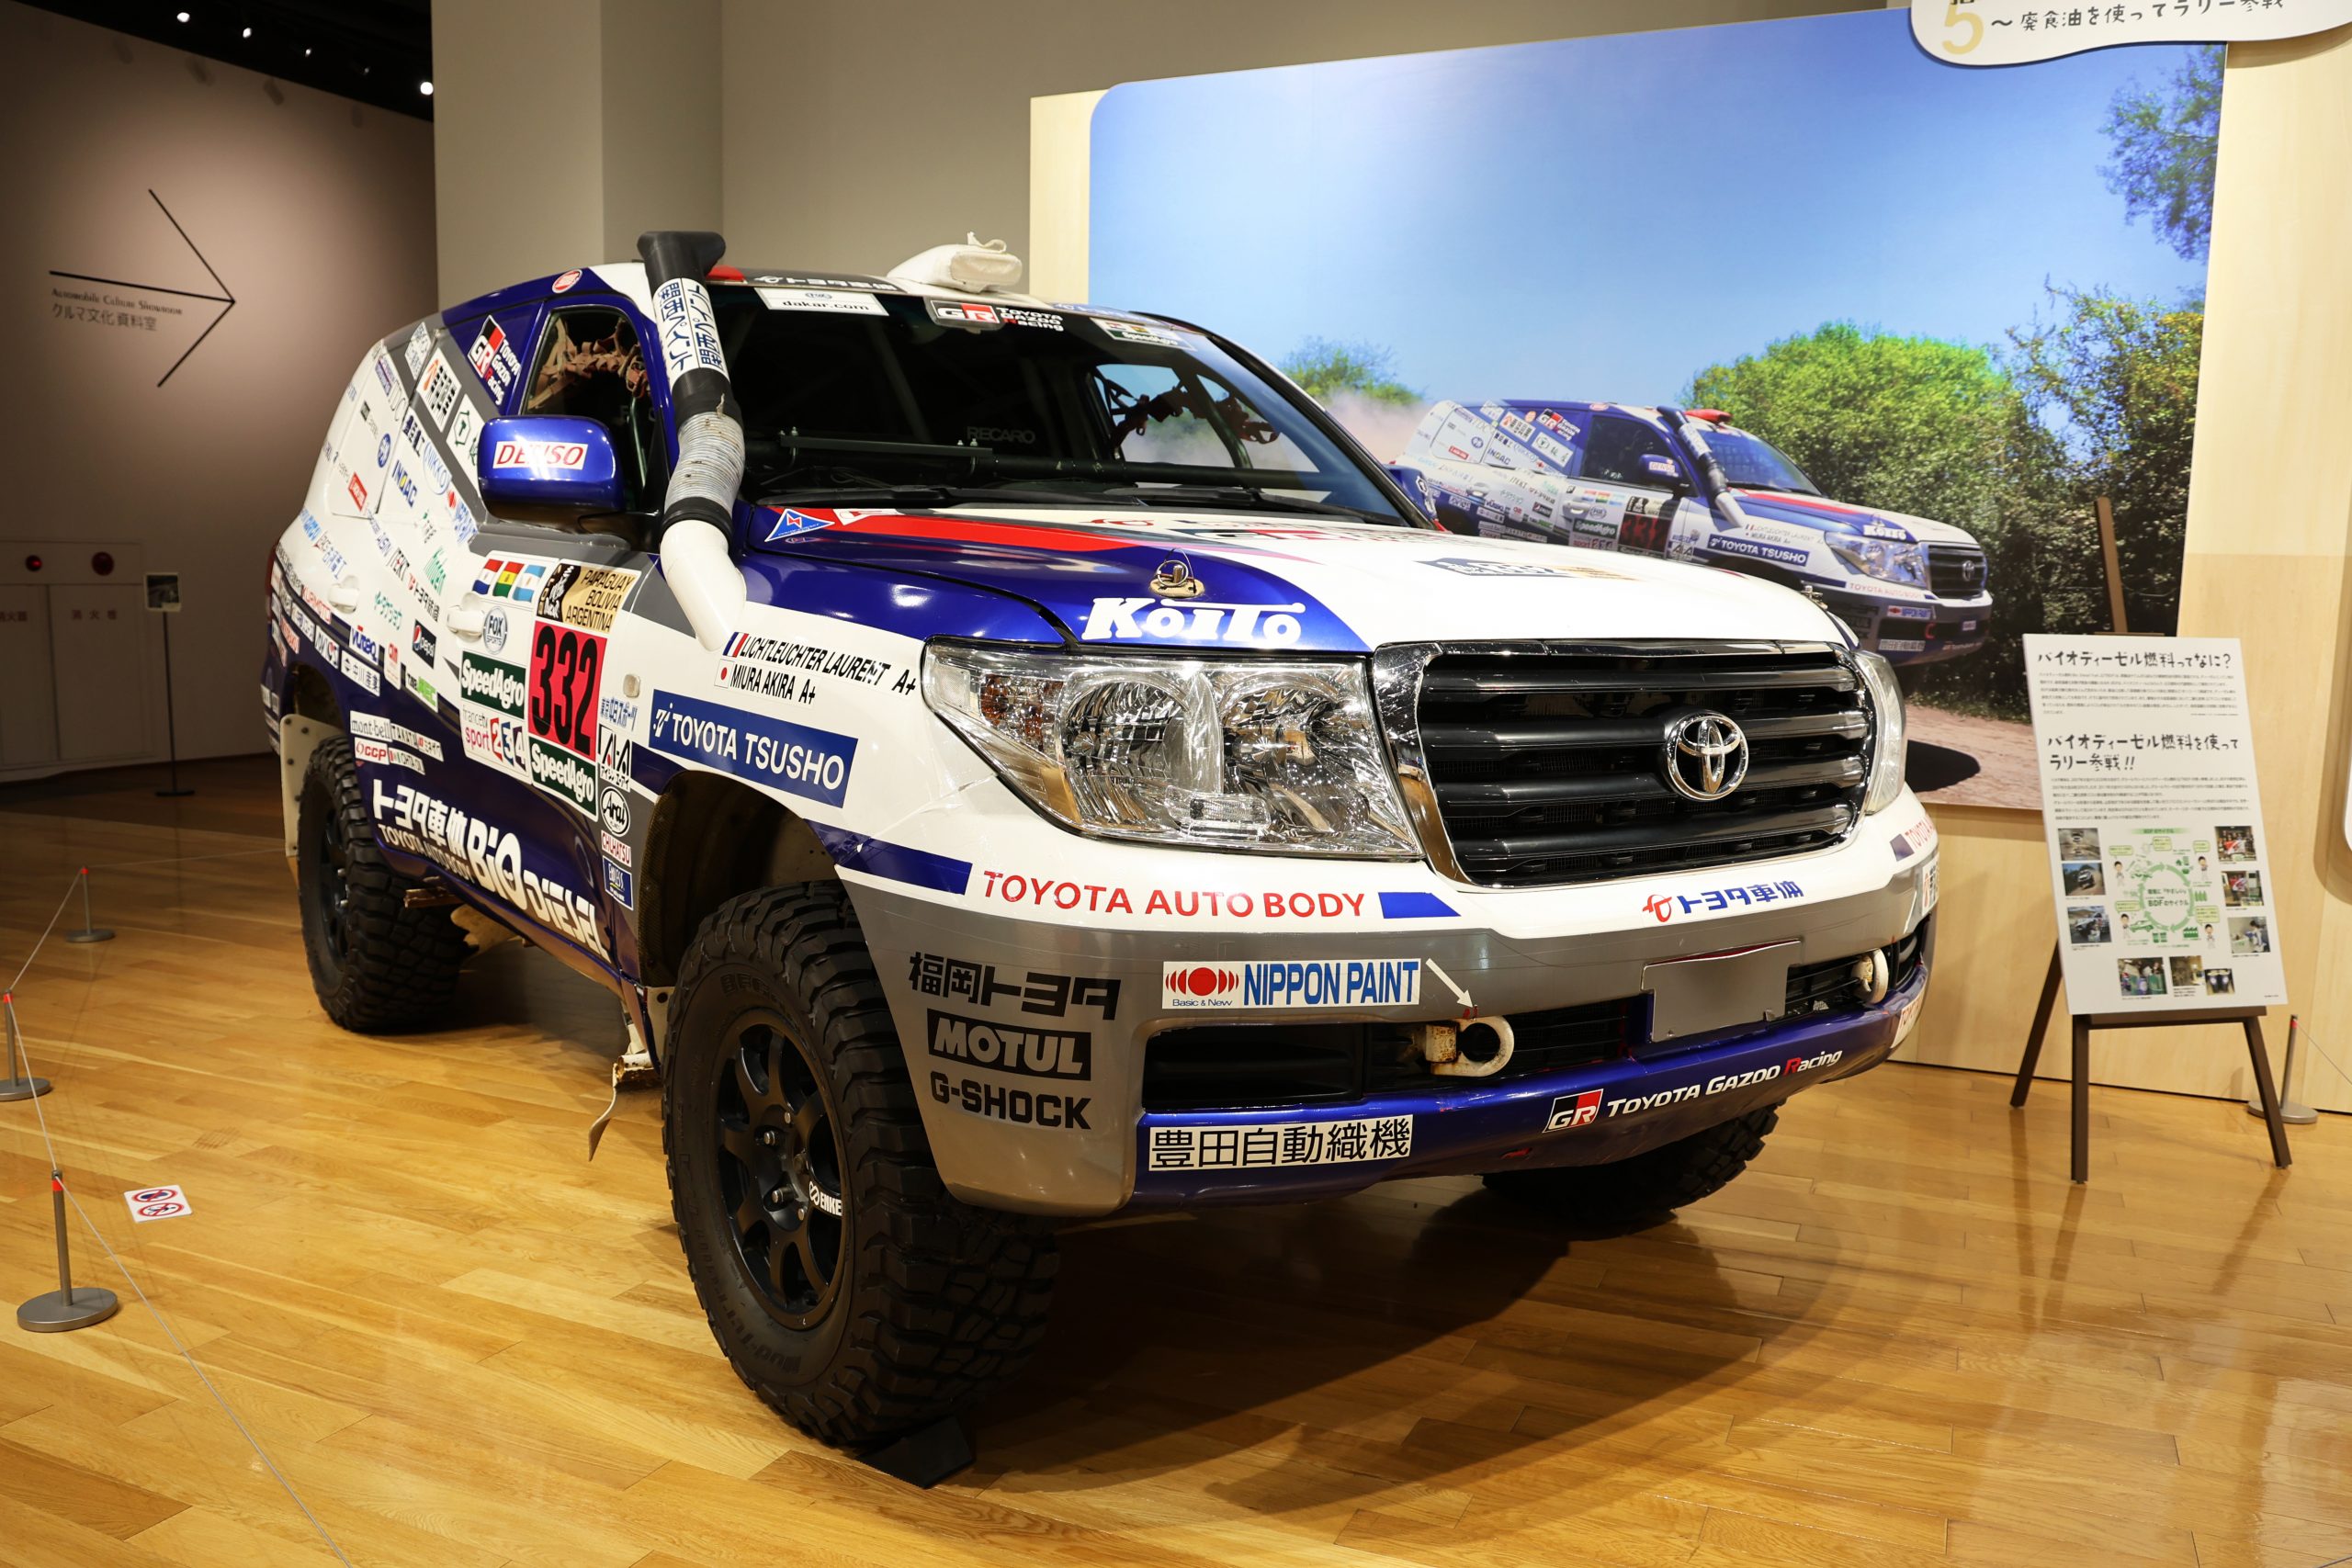 Toyota Land Cruiser 200 (Dakar Rally 2017 participation car specification) [In the collection of Toyota Auto Body Co.,Ltd.]